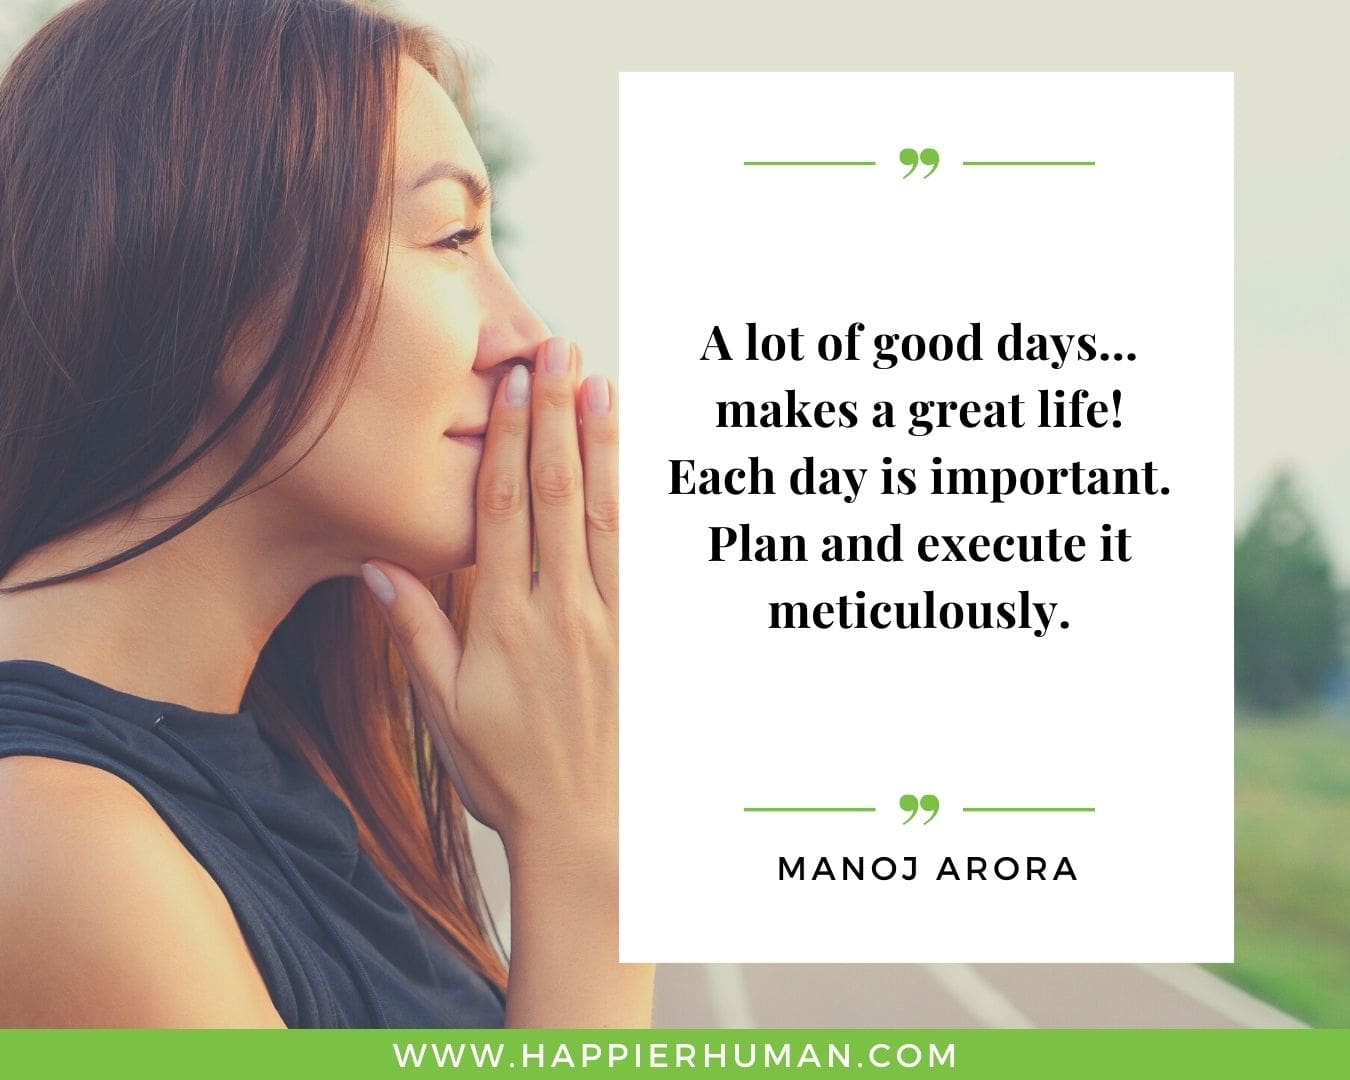 Great Day Quotes - “A lot of good days… makes a great life! Each day is important. Plan and execute it meticulously.” – Manoj Arora